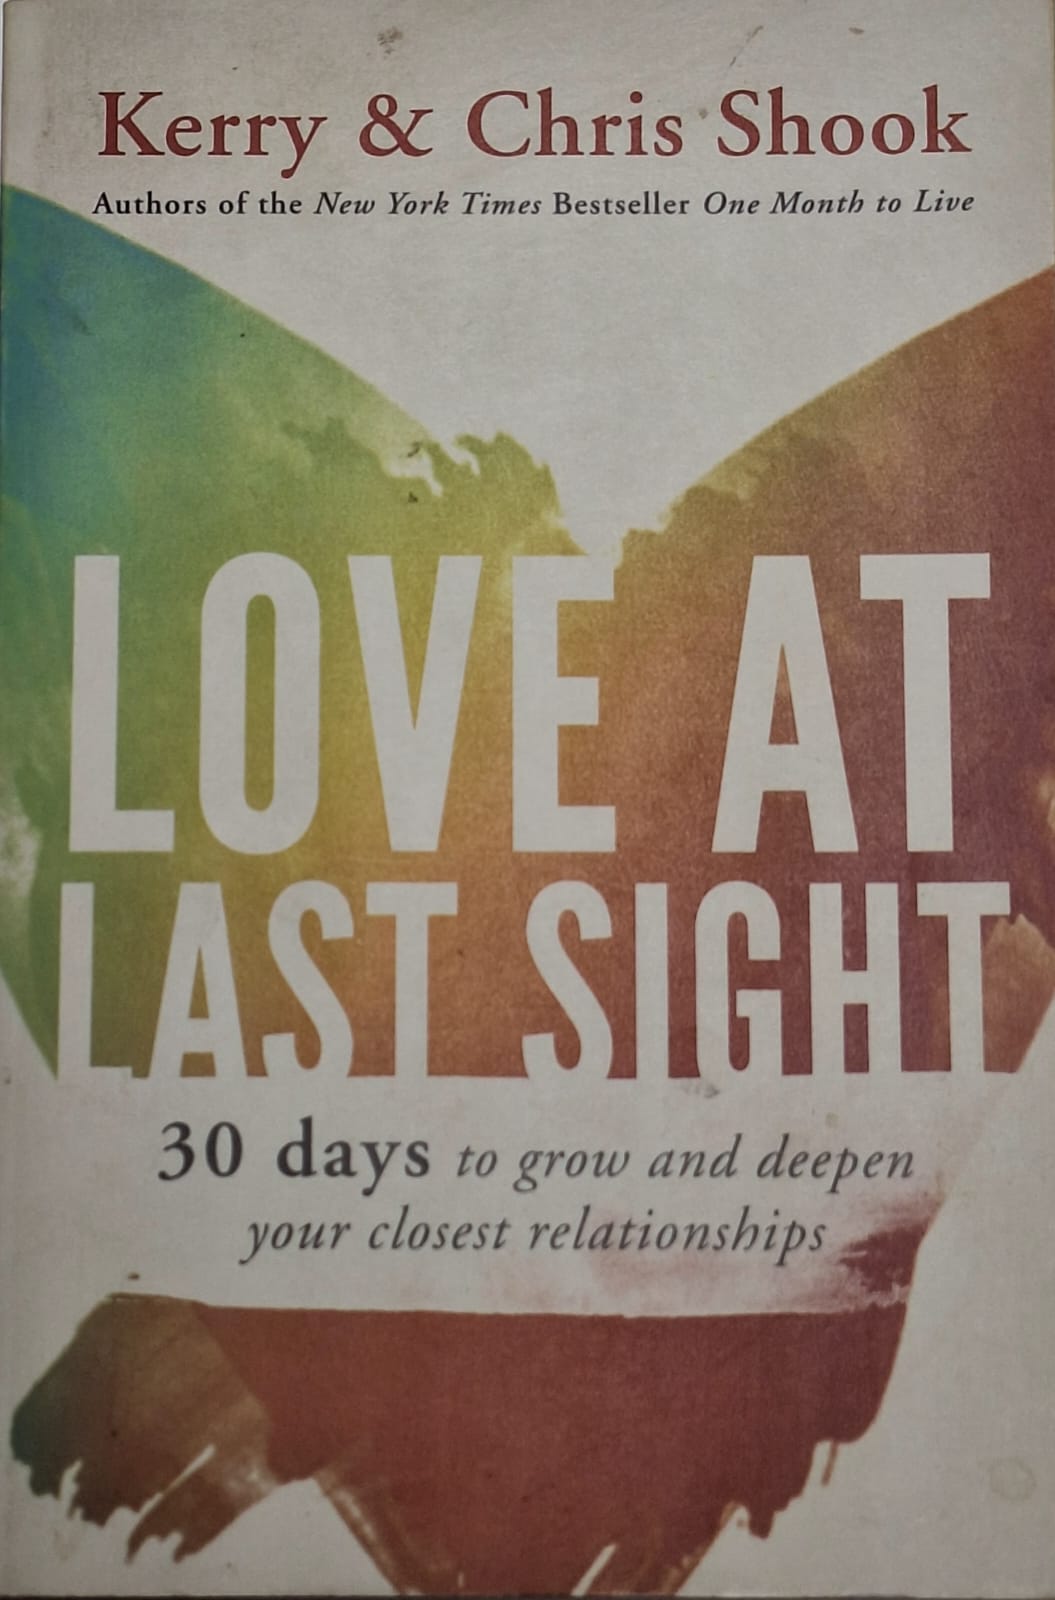 Shook, Chris & Kerry - LOVE AT LAST SIGHT: 30 DAYS TO GROW AND DEEPEN YOUR CLOSEST RELATIONSHIPS